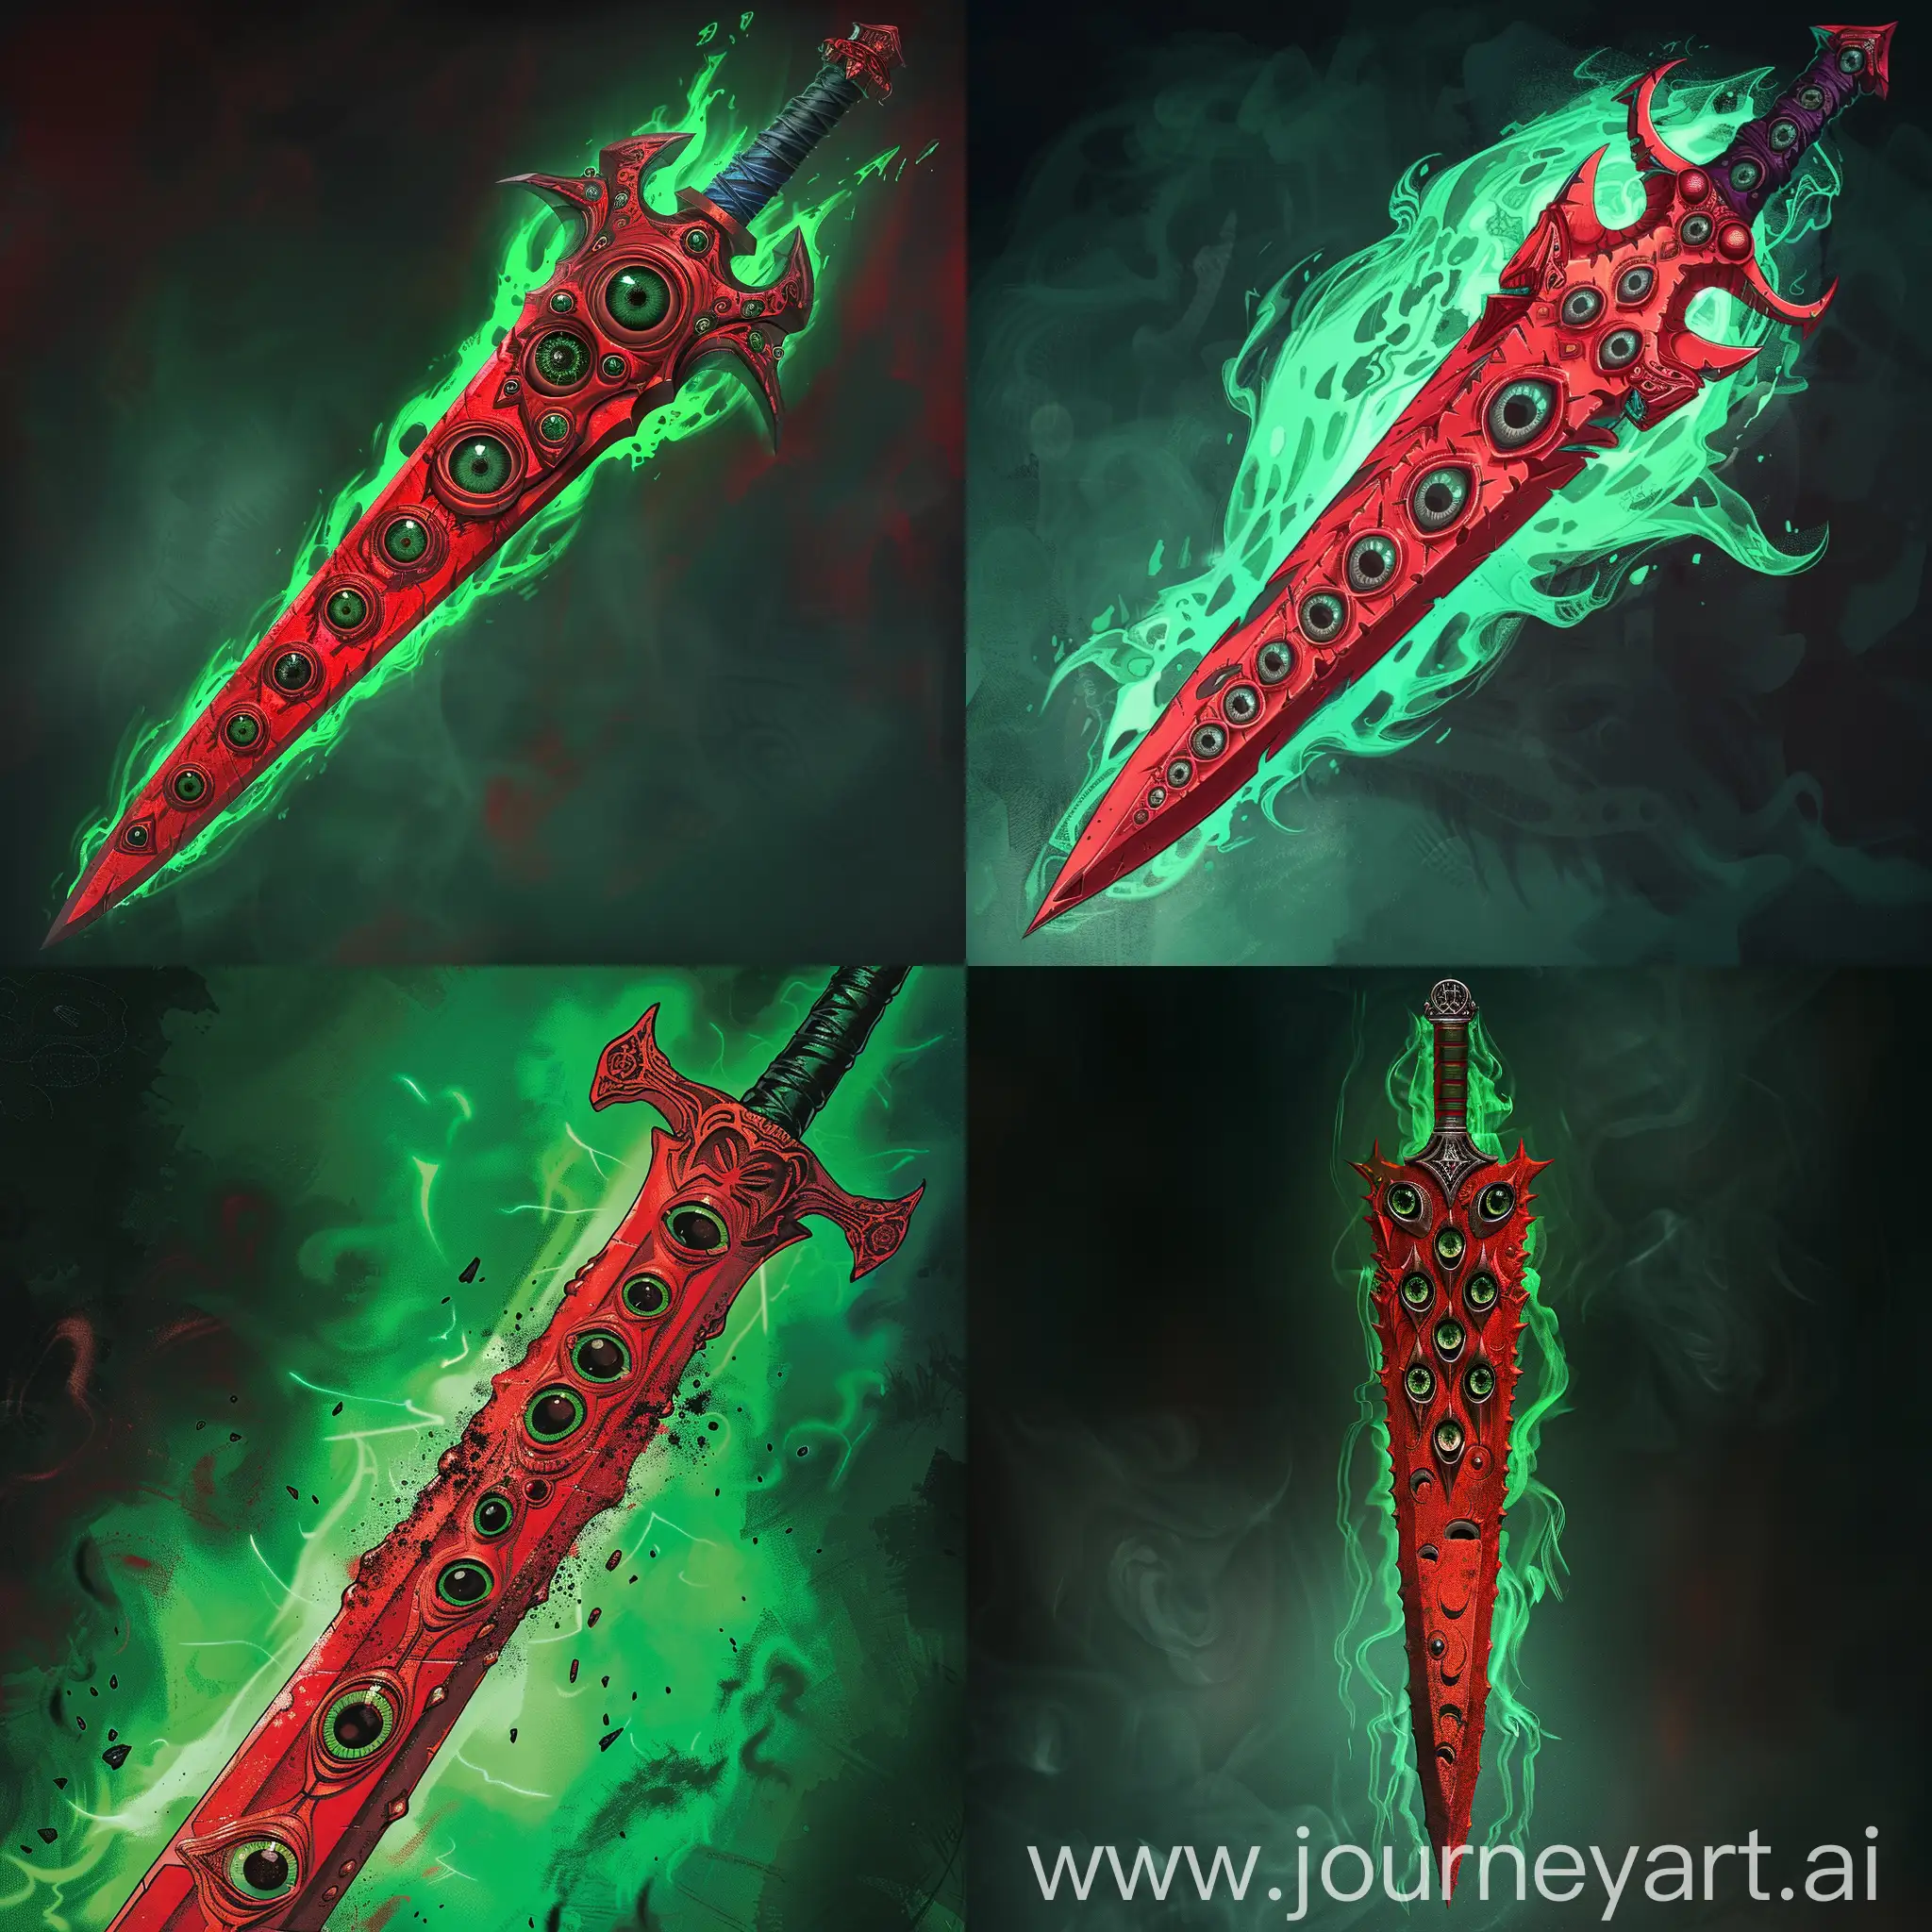 Comic sketches, comic strip, detailed superhero image, special effects, comic book atmosphere, ultra-detailed costumes, crafted image, inspired by comic book style, create a unique image model. Red dagger with many eyes on the blade, with a green aura around the dagger.
